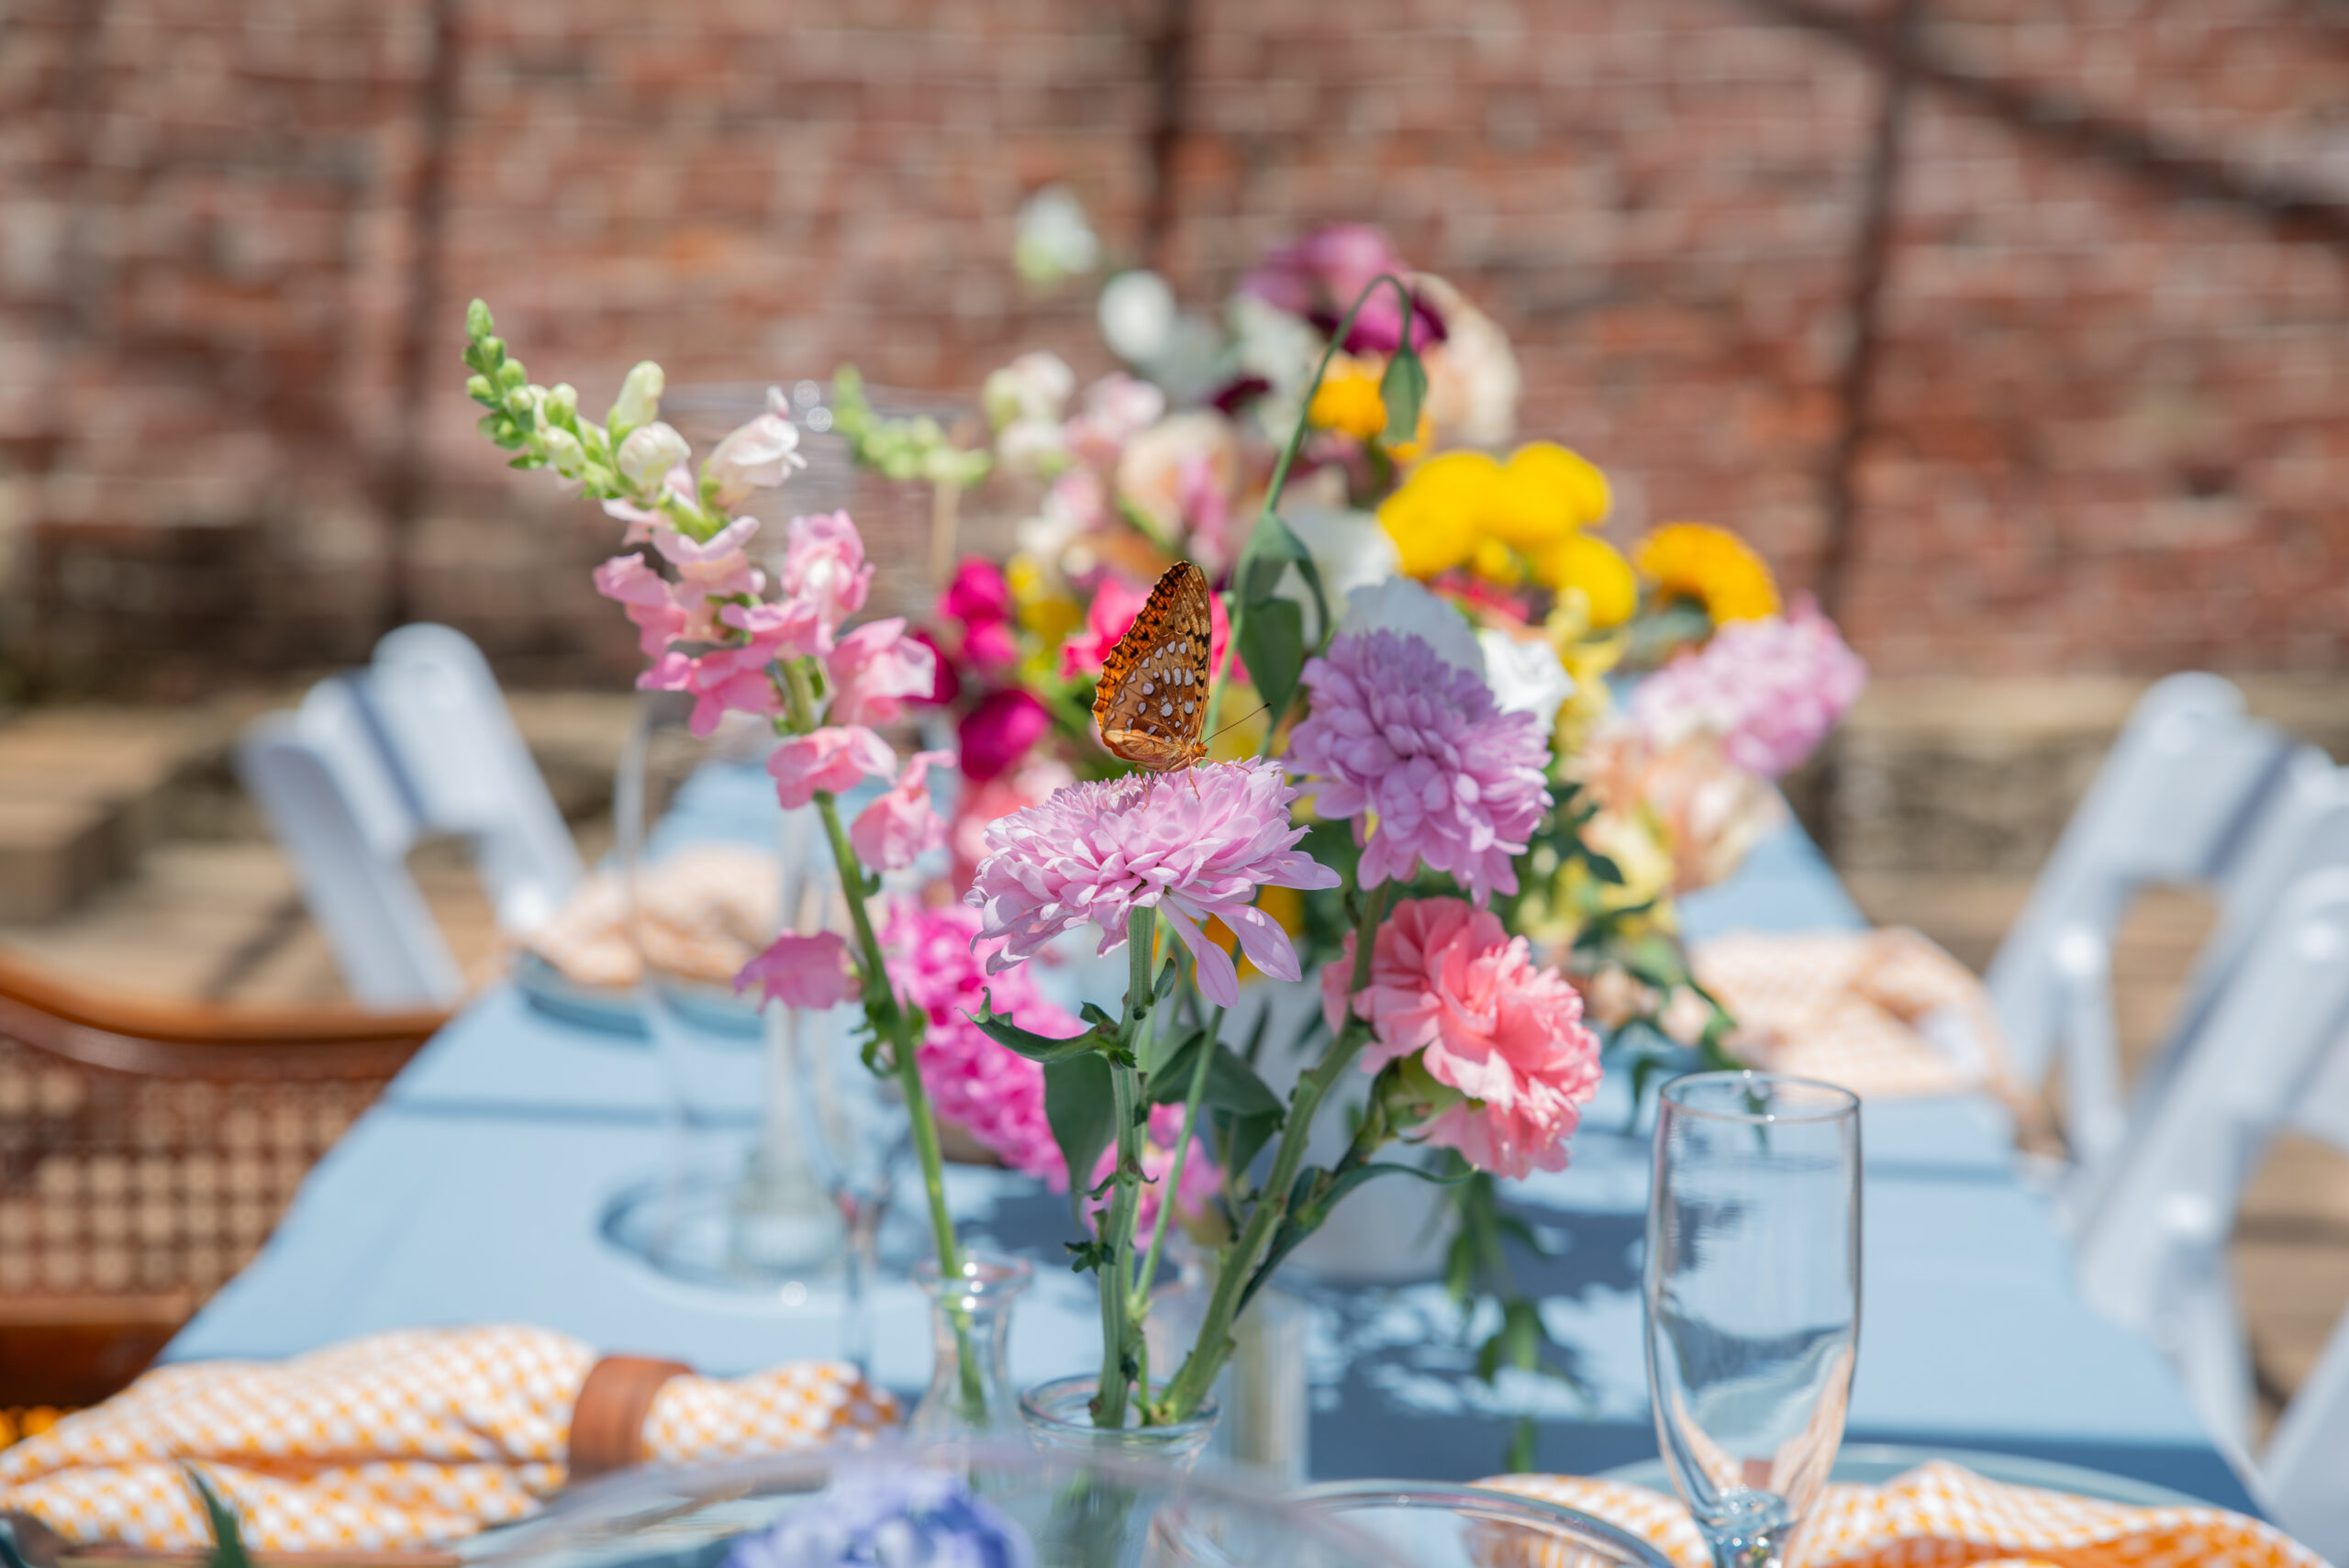 butterfly sits on flowers during wedding reception